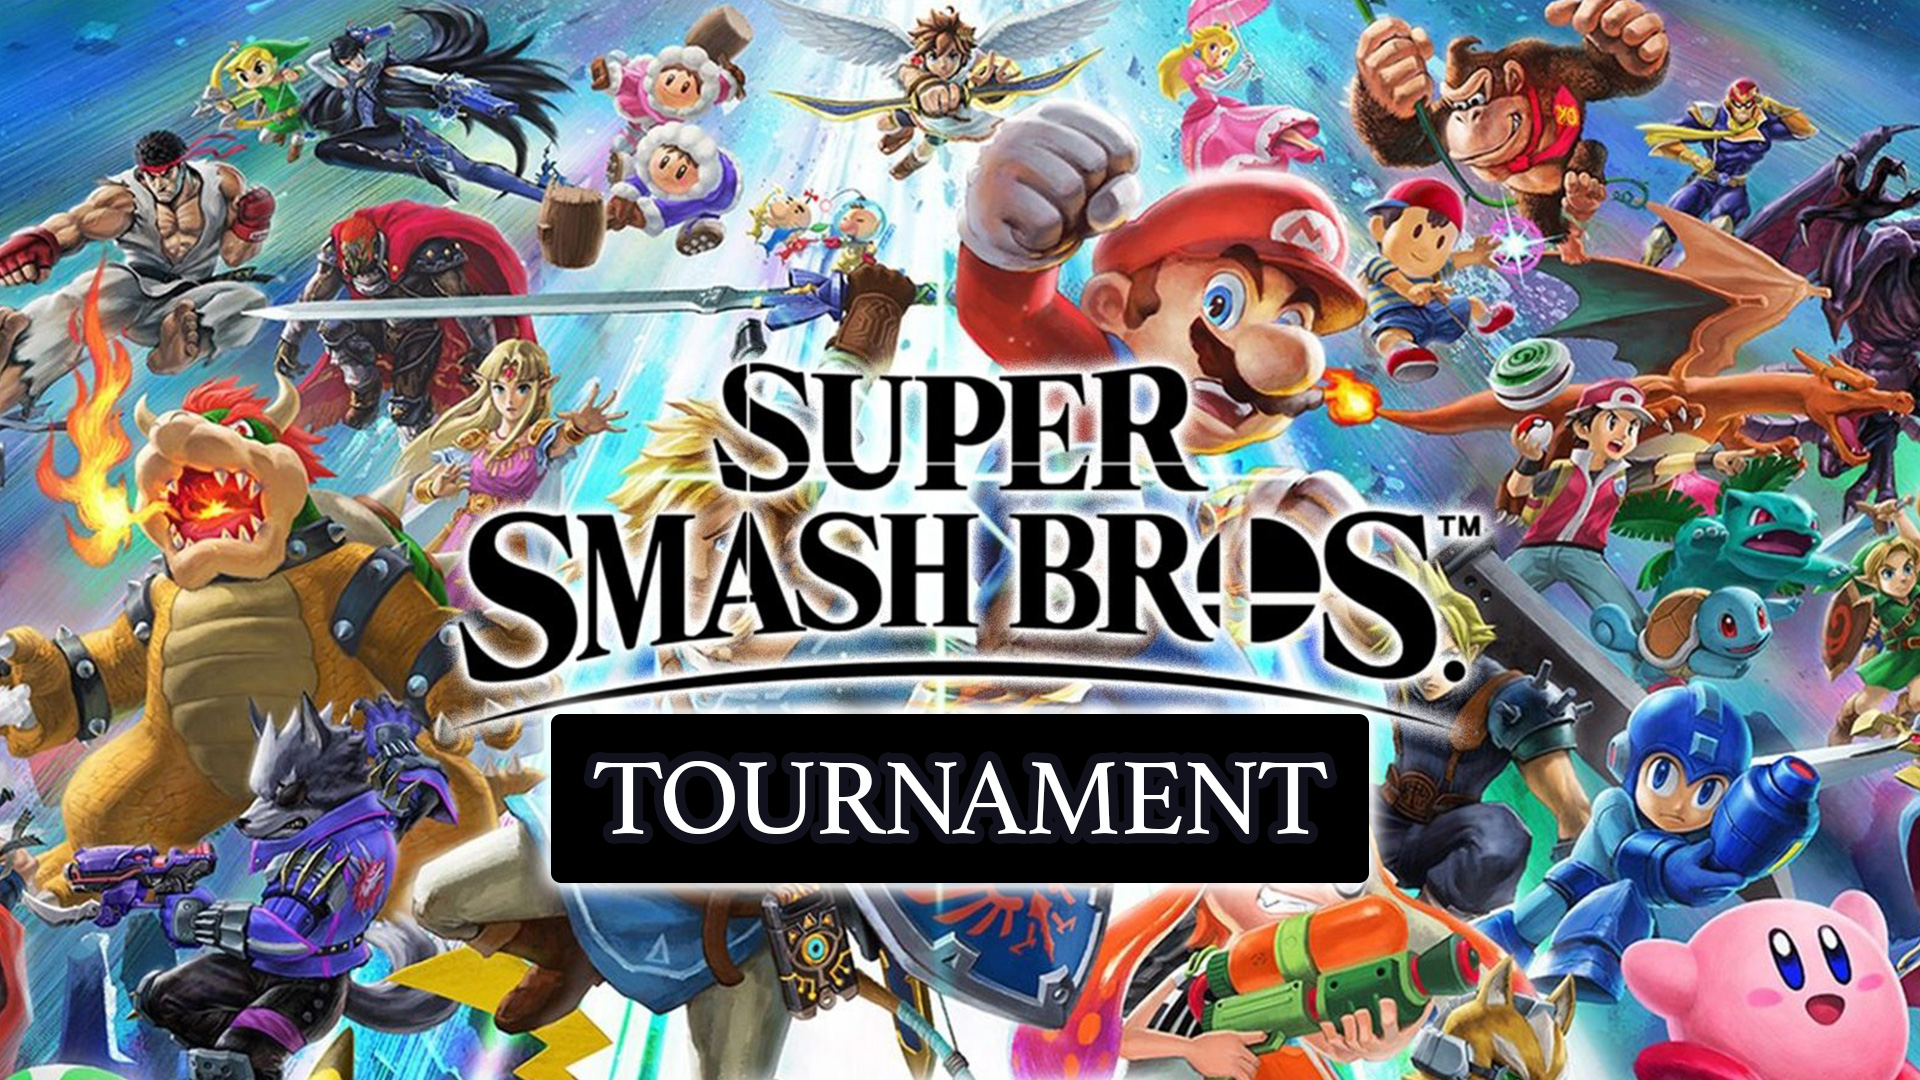 Super Smash Bros characters facing off to battle